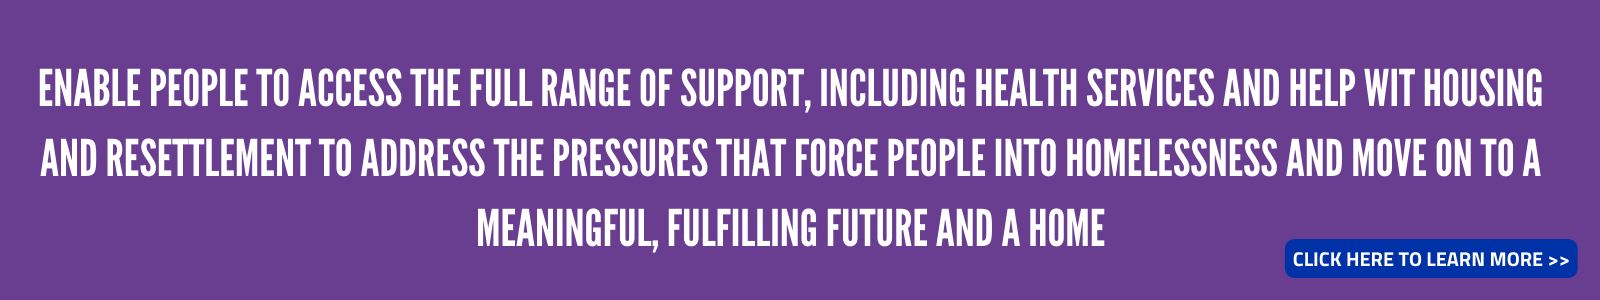 Enable people to access the full range of support, including health services and help with housing and resettlement to address the pressures that force people into homelessness and move on to a meaningful, fulfilling future and a home